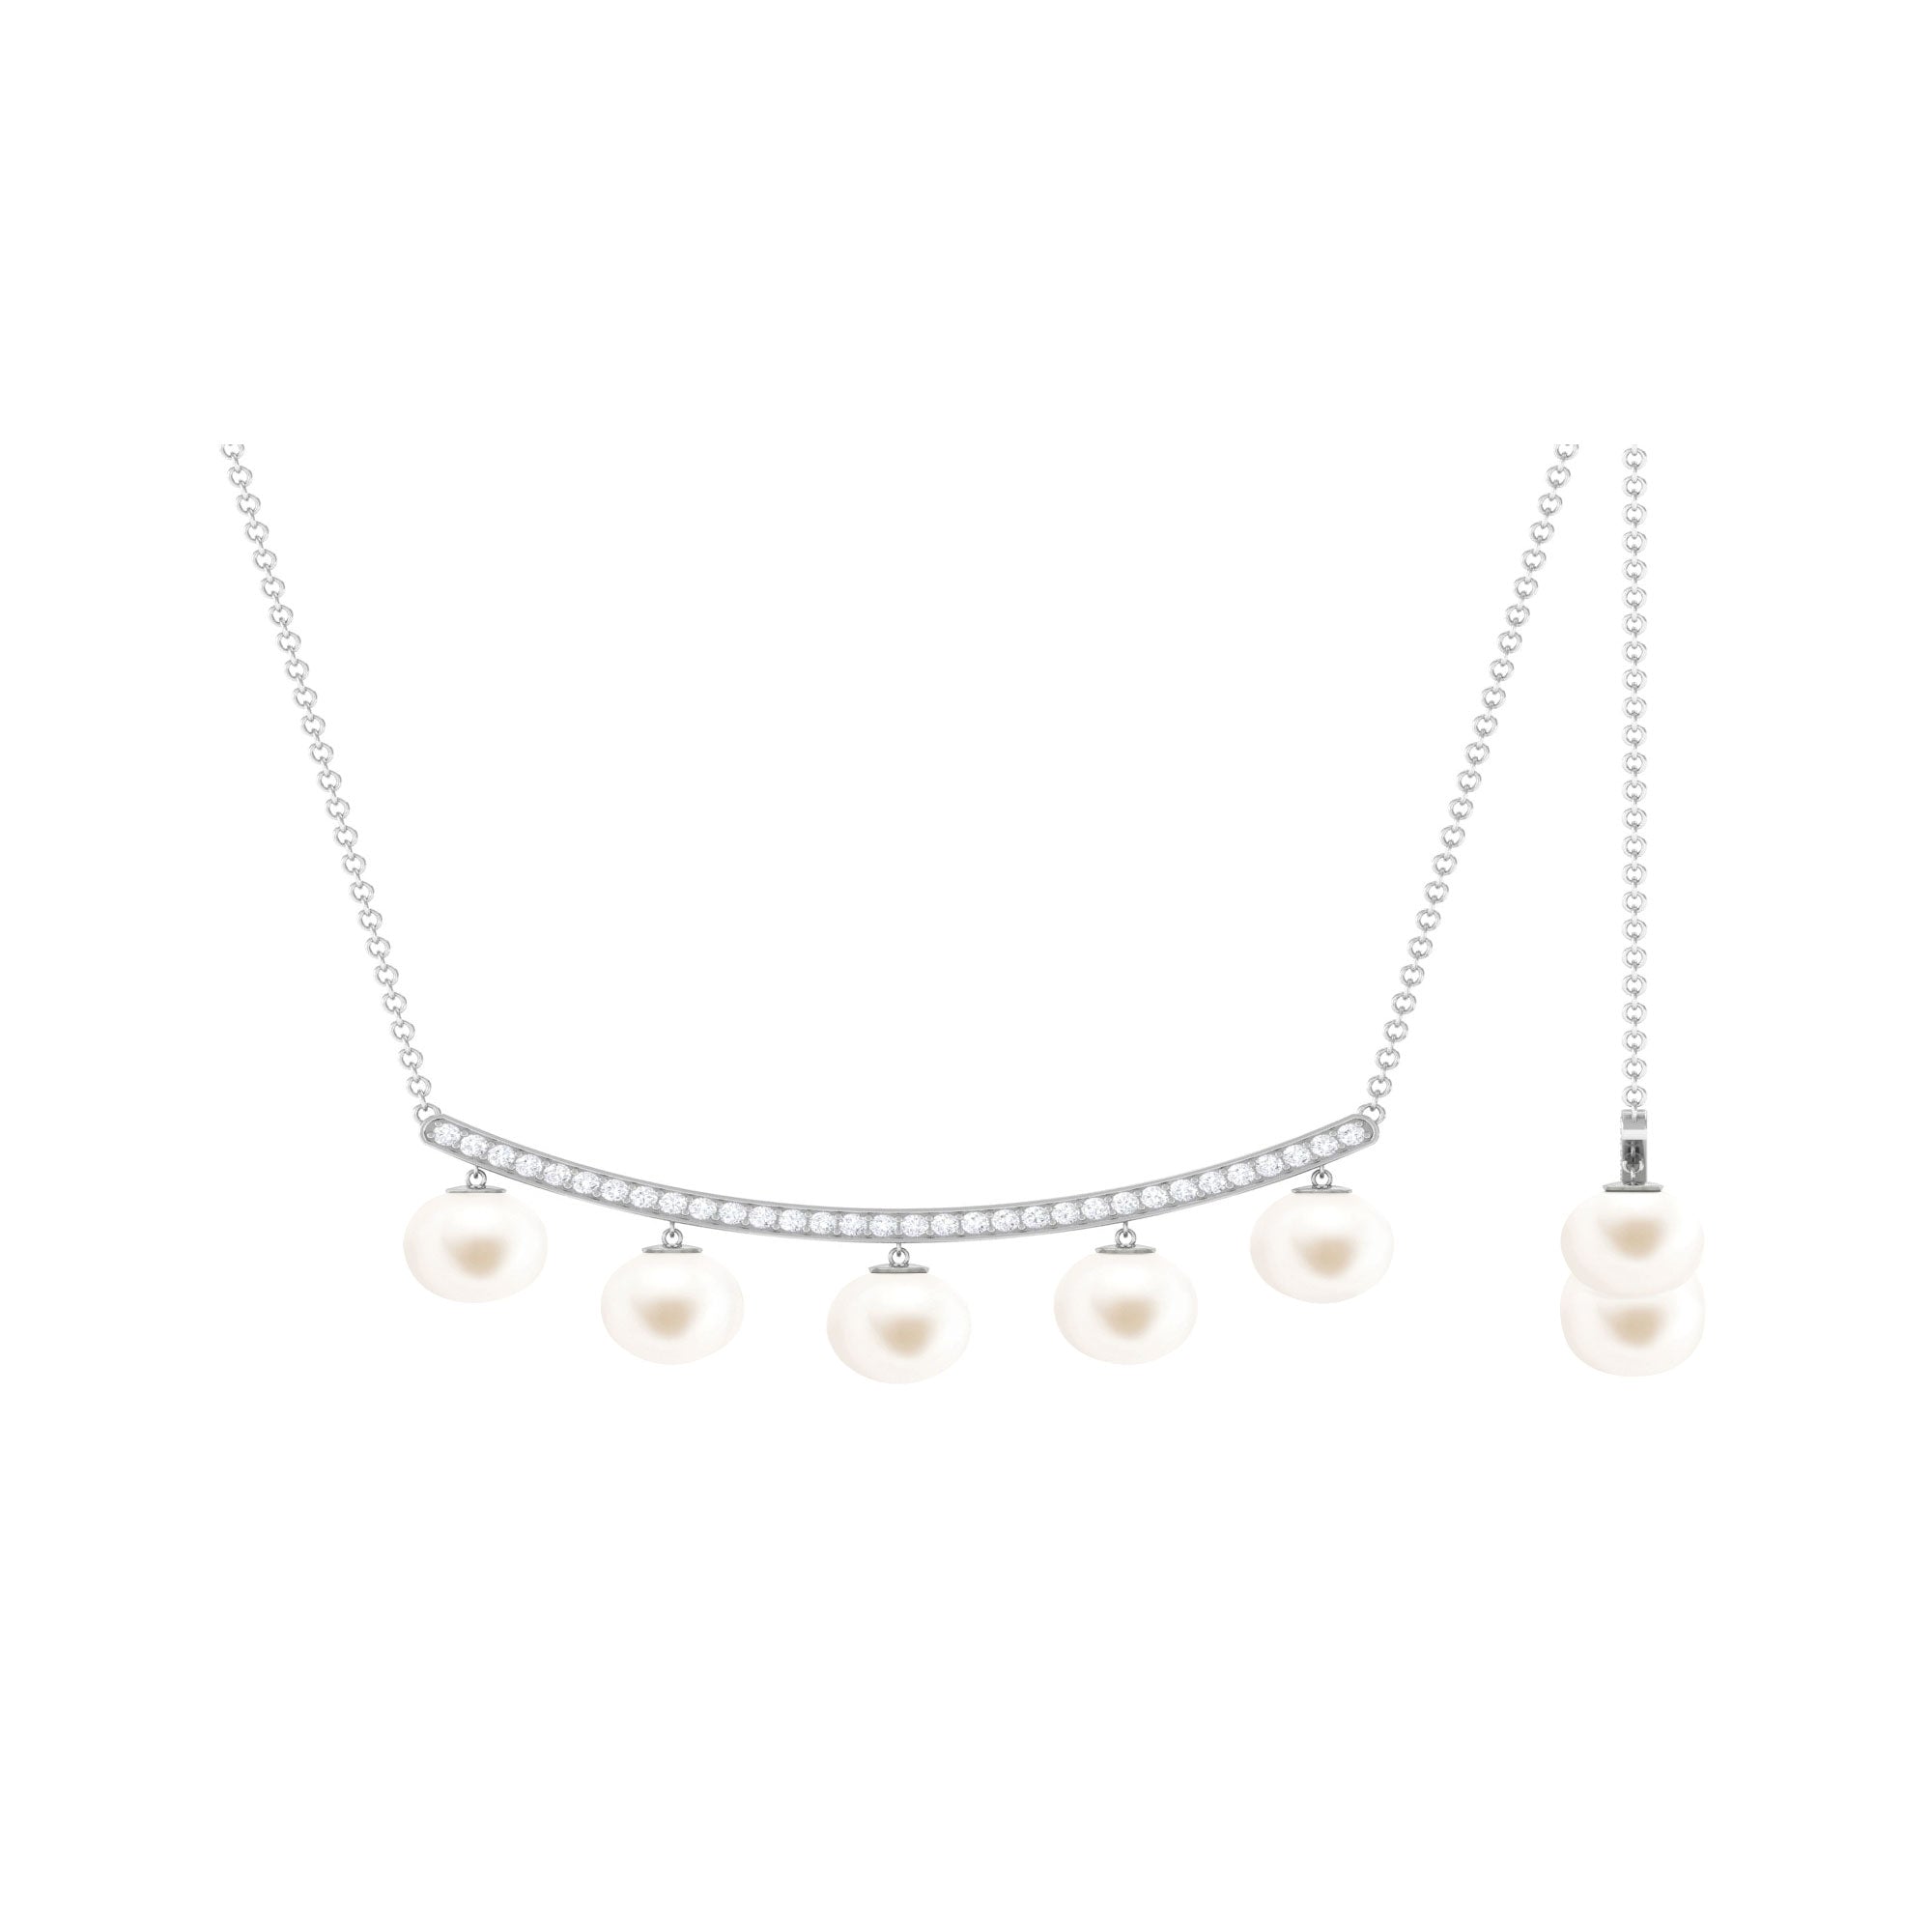 Real Freshwater Pearl Curved Bar Necklace with Diamond Freshwater Pearl-AAA Quality - Arisha Jewels